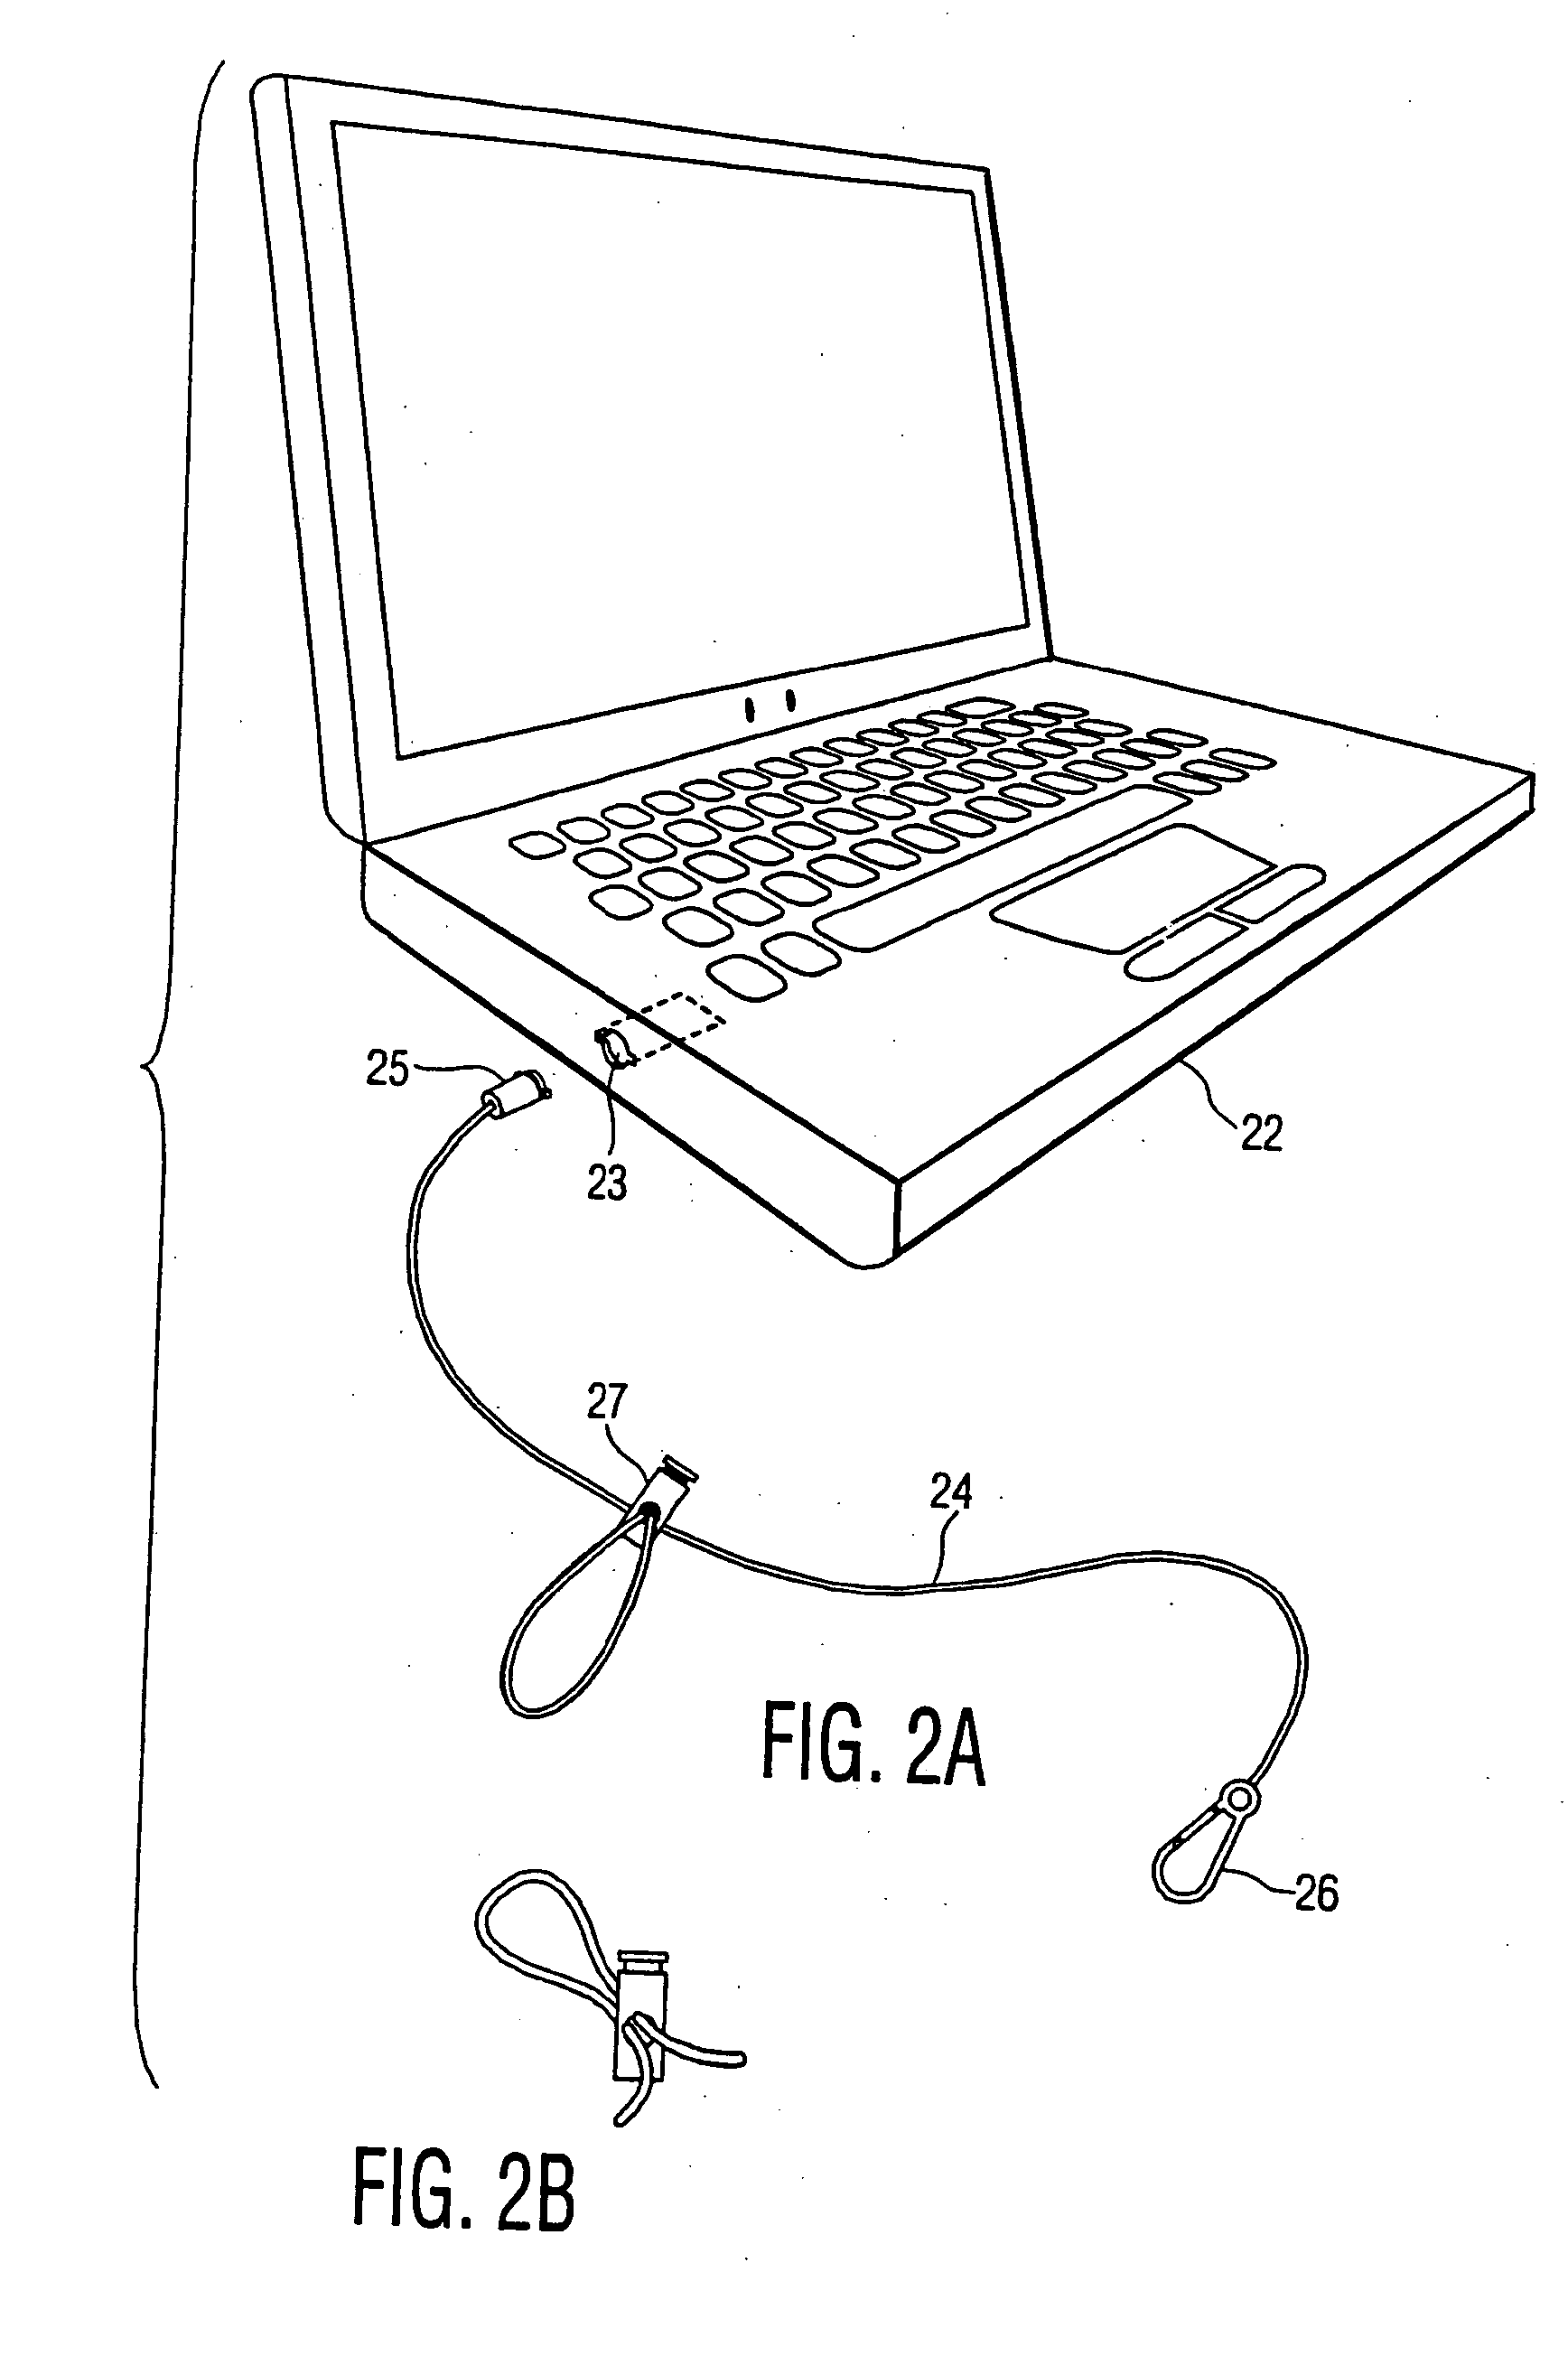 Tether arrangement for portable electronic device, such as a laptop computer